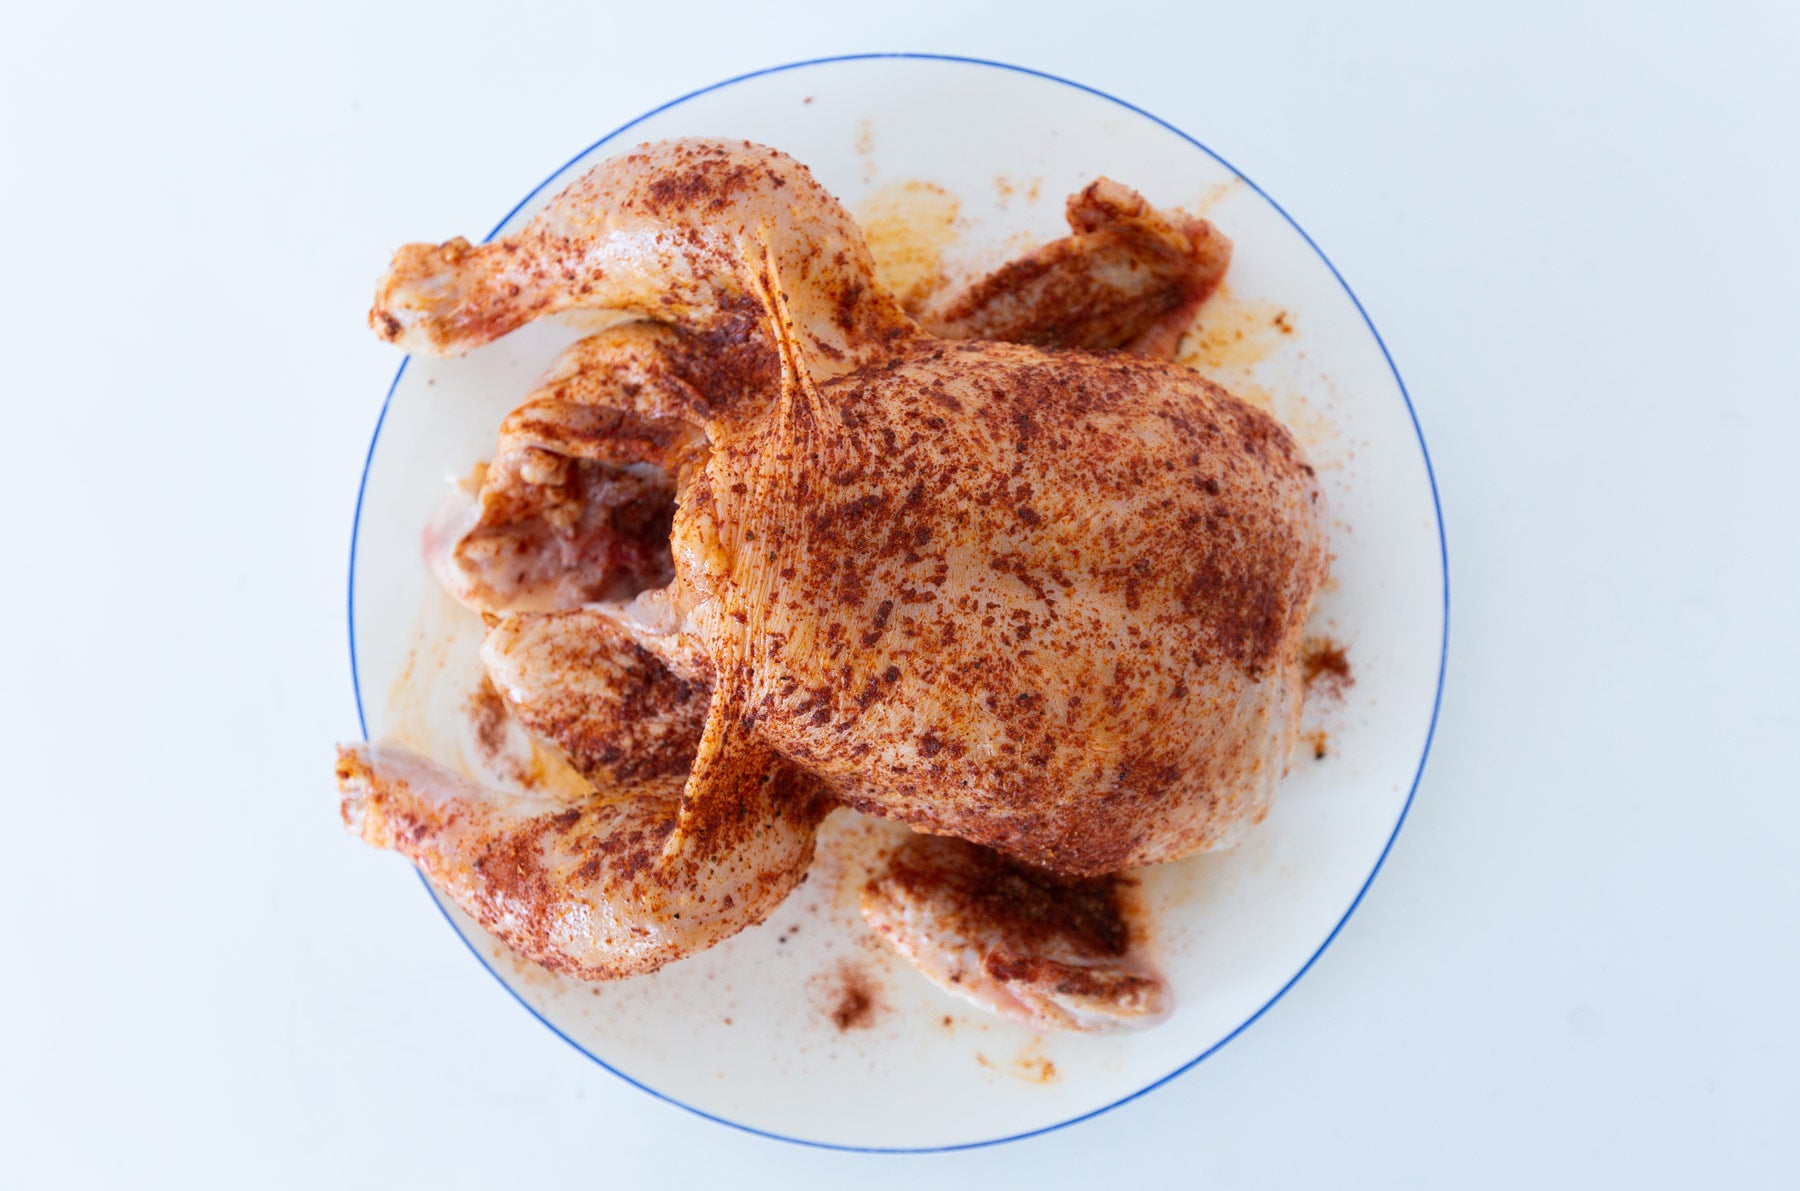 Chicken rubbed with spices.